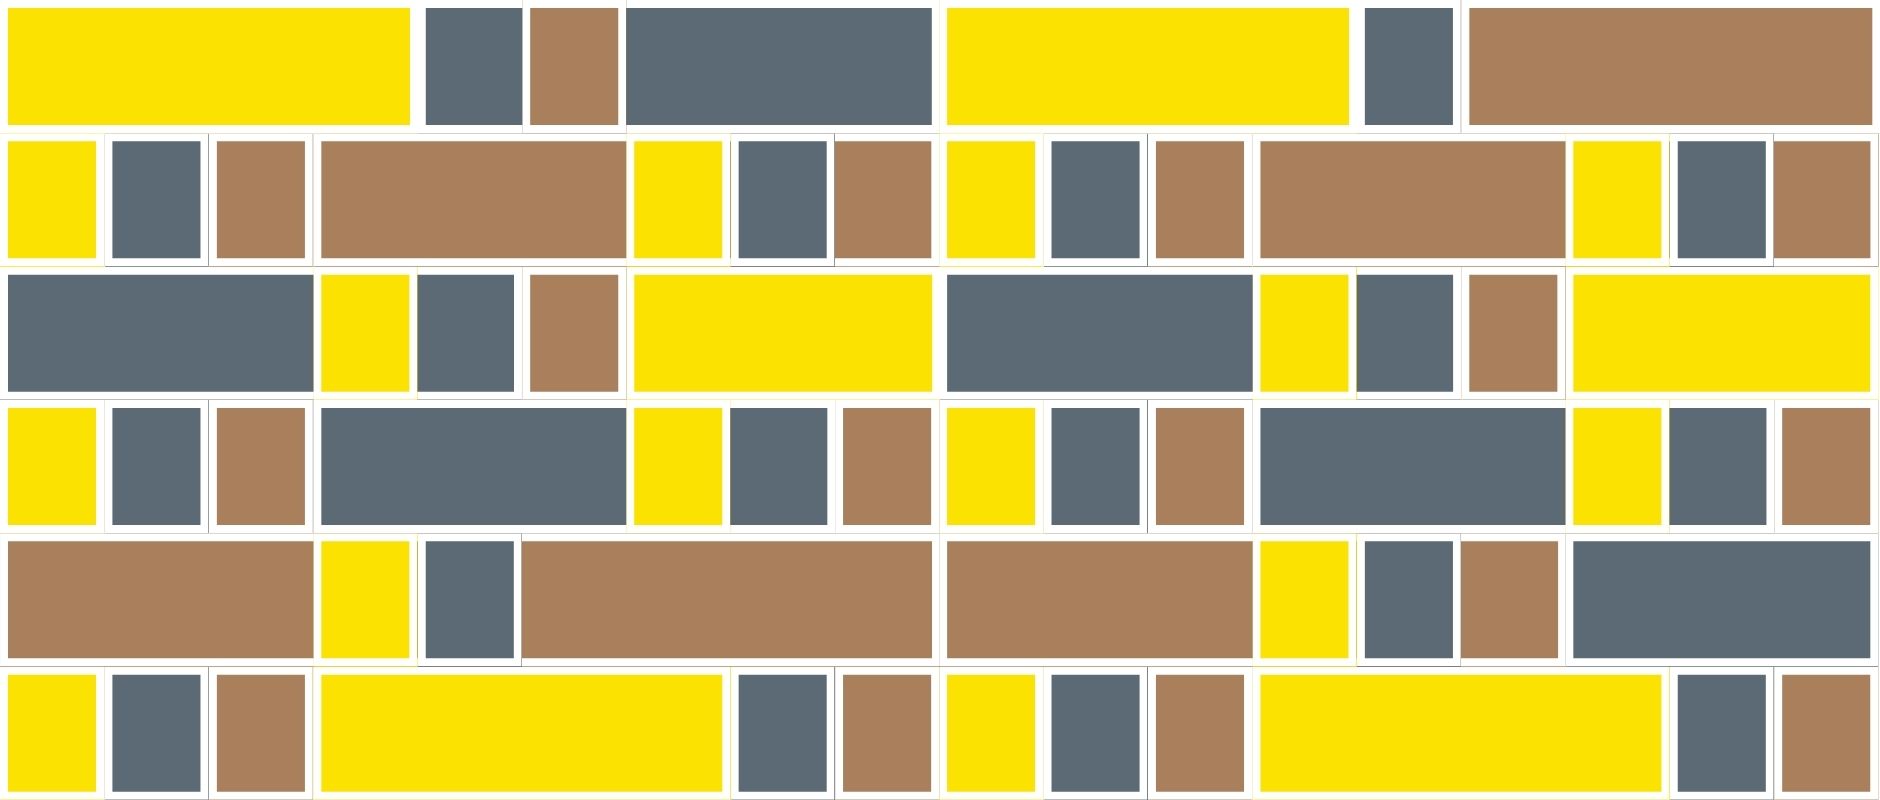 Blog cover image for an Autumn Colour Trend blog post. The image features a geometric pattern made out of three colours, Illuminating yellow, stormy weather grey, and spiced apple brown.